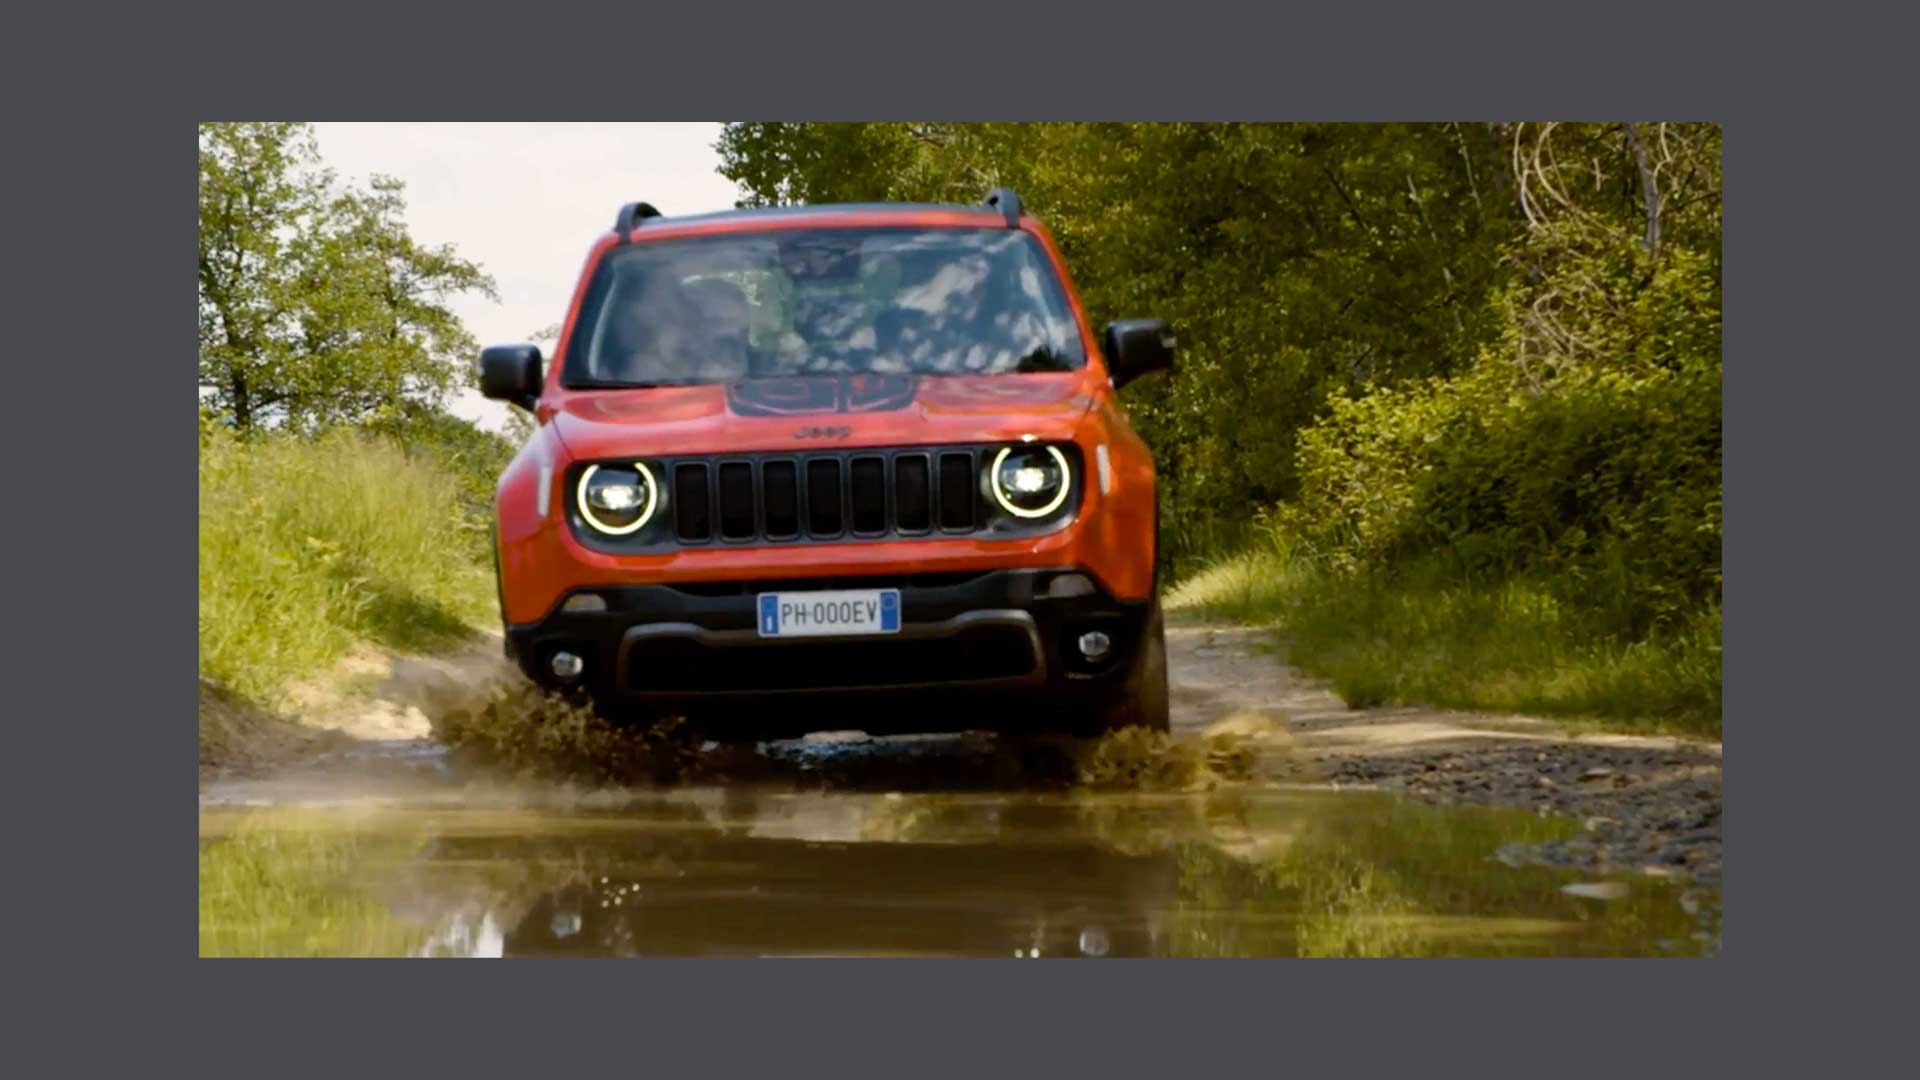 Photo of a Jeep Renegade on muddy ground